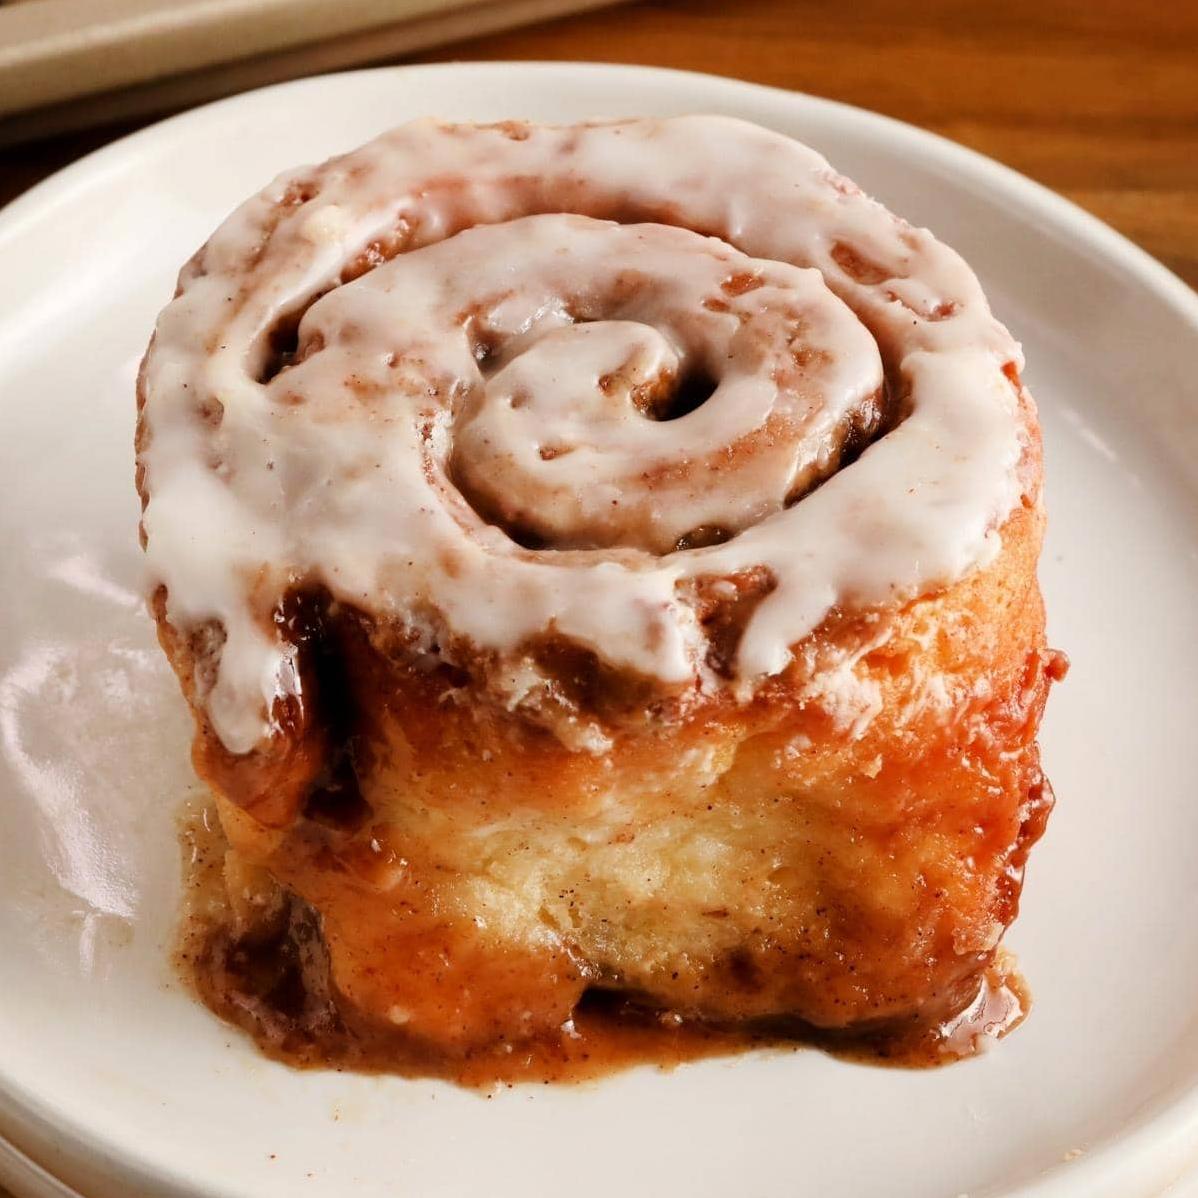  You won't believe these are gluten-free cinnamon rolls until you taste them!